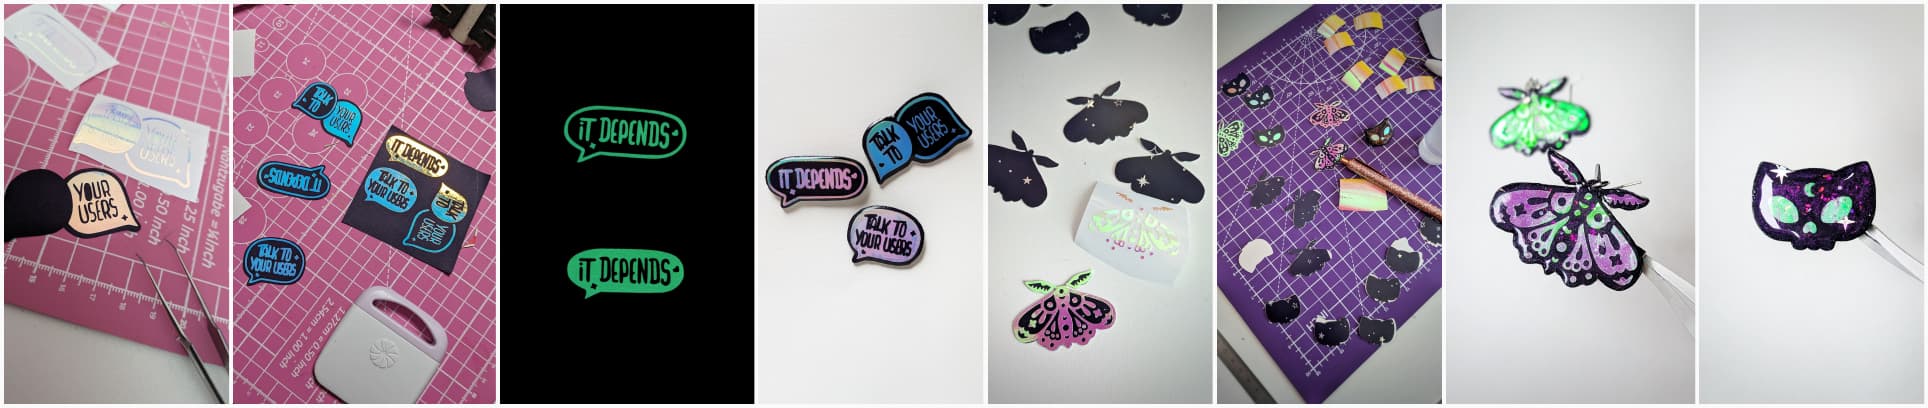 Collage of the creation of different glow in the dark pins: some "talk to your users" and "it depends" in a speech bubble and some moths and black cat head